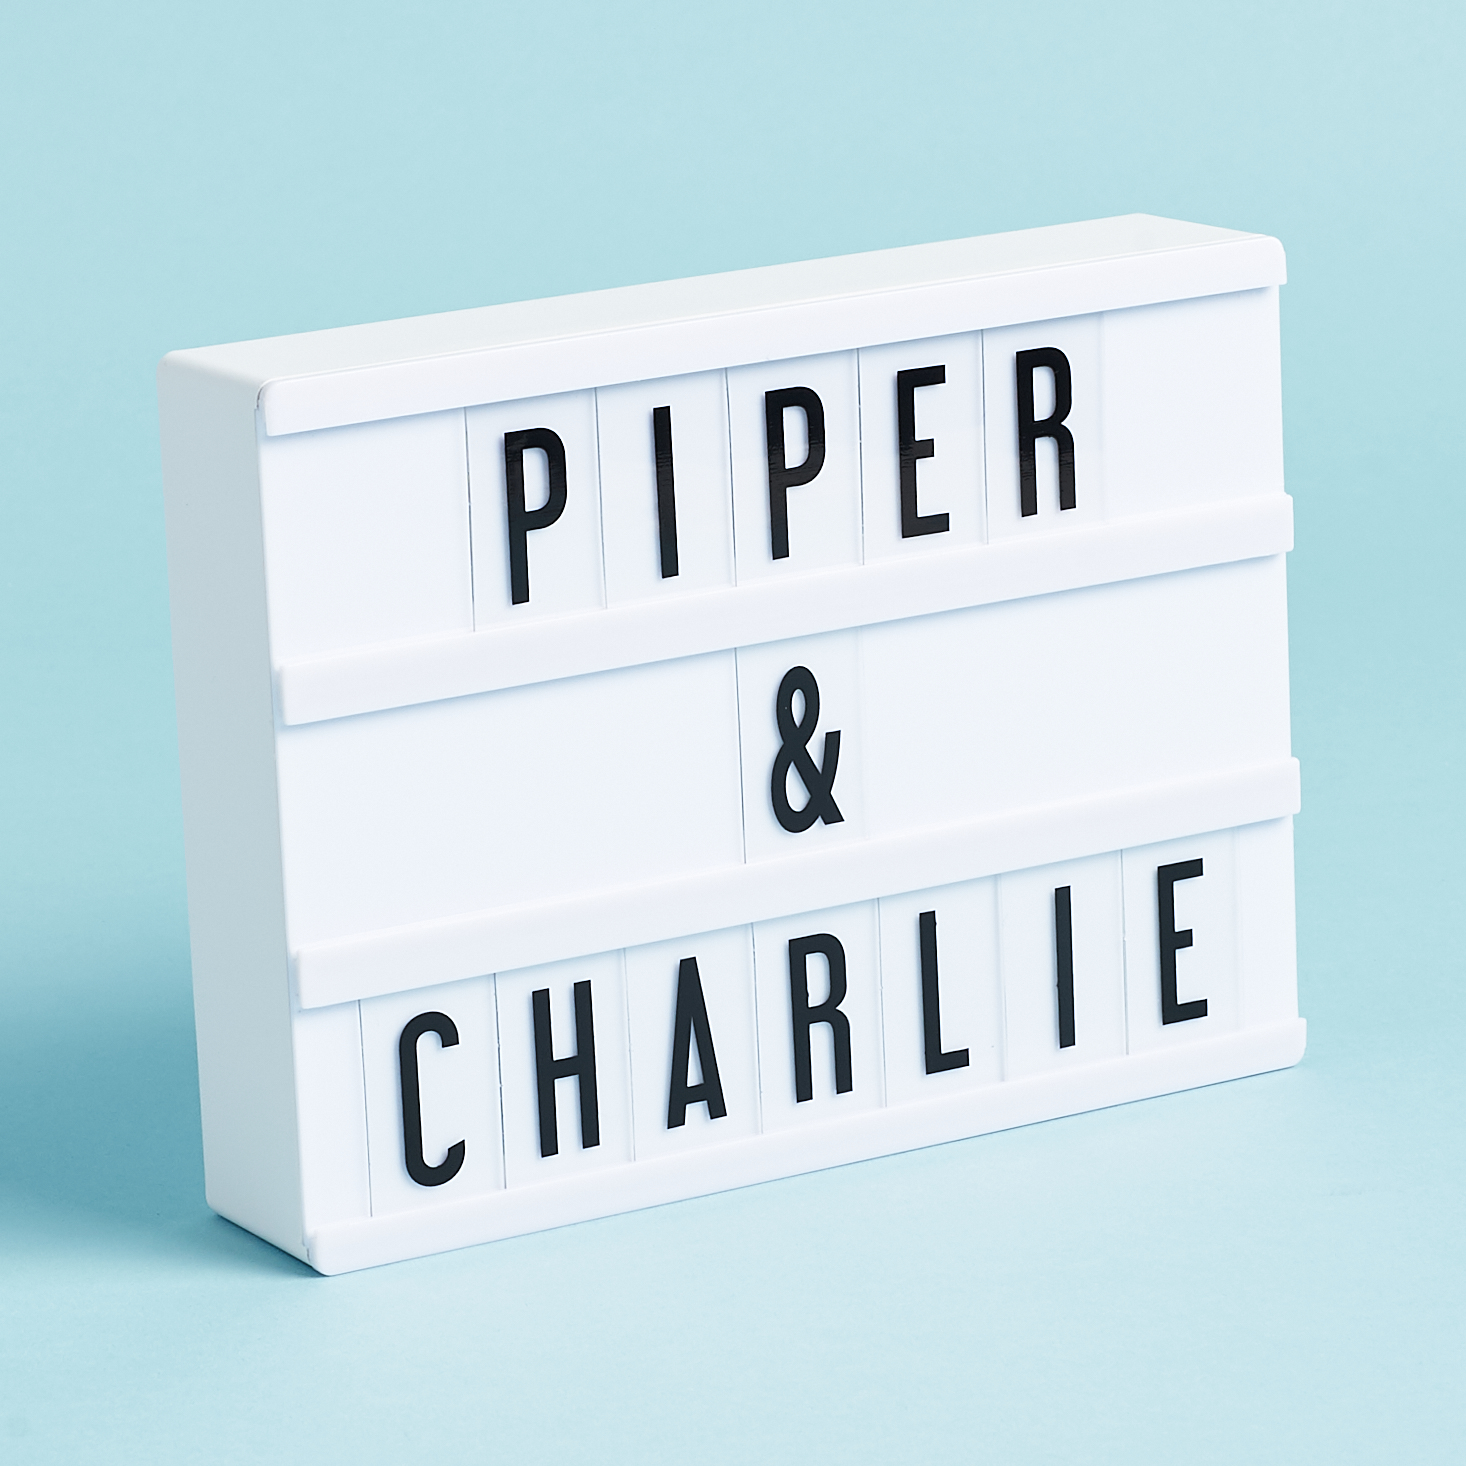 cinema lightboard with piper & charlie spelled out